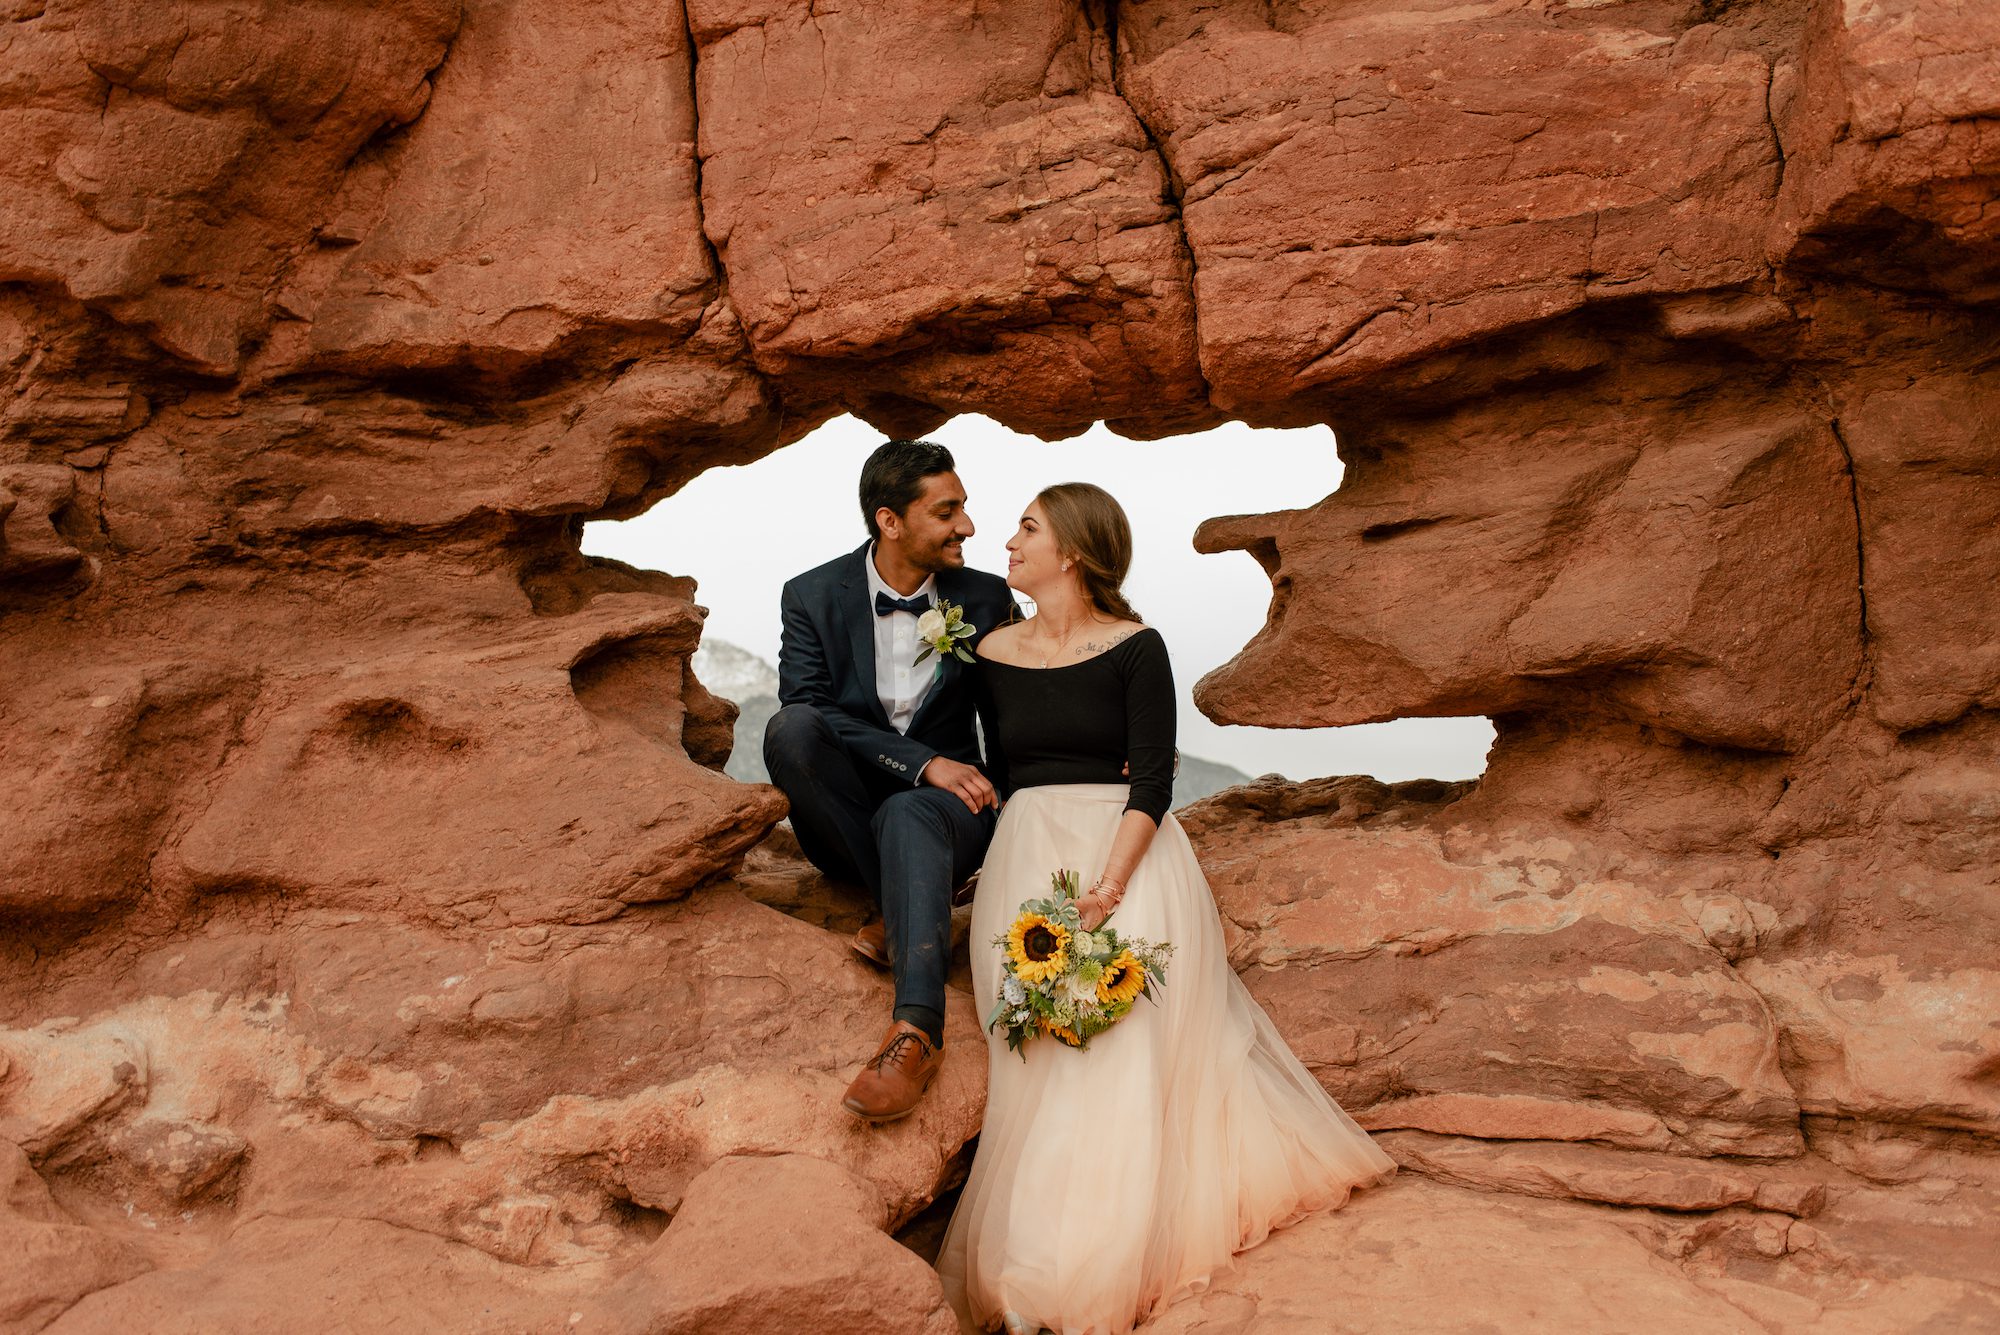 Annika Stacey Photo - Couple on rock formation